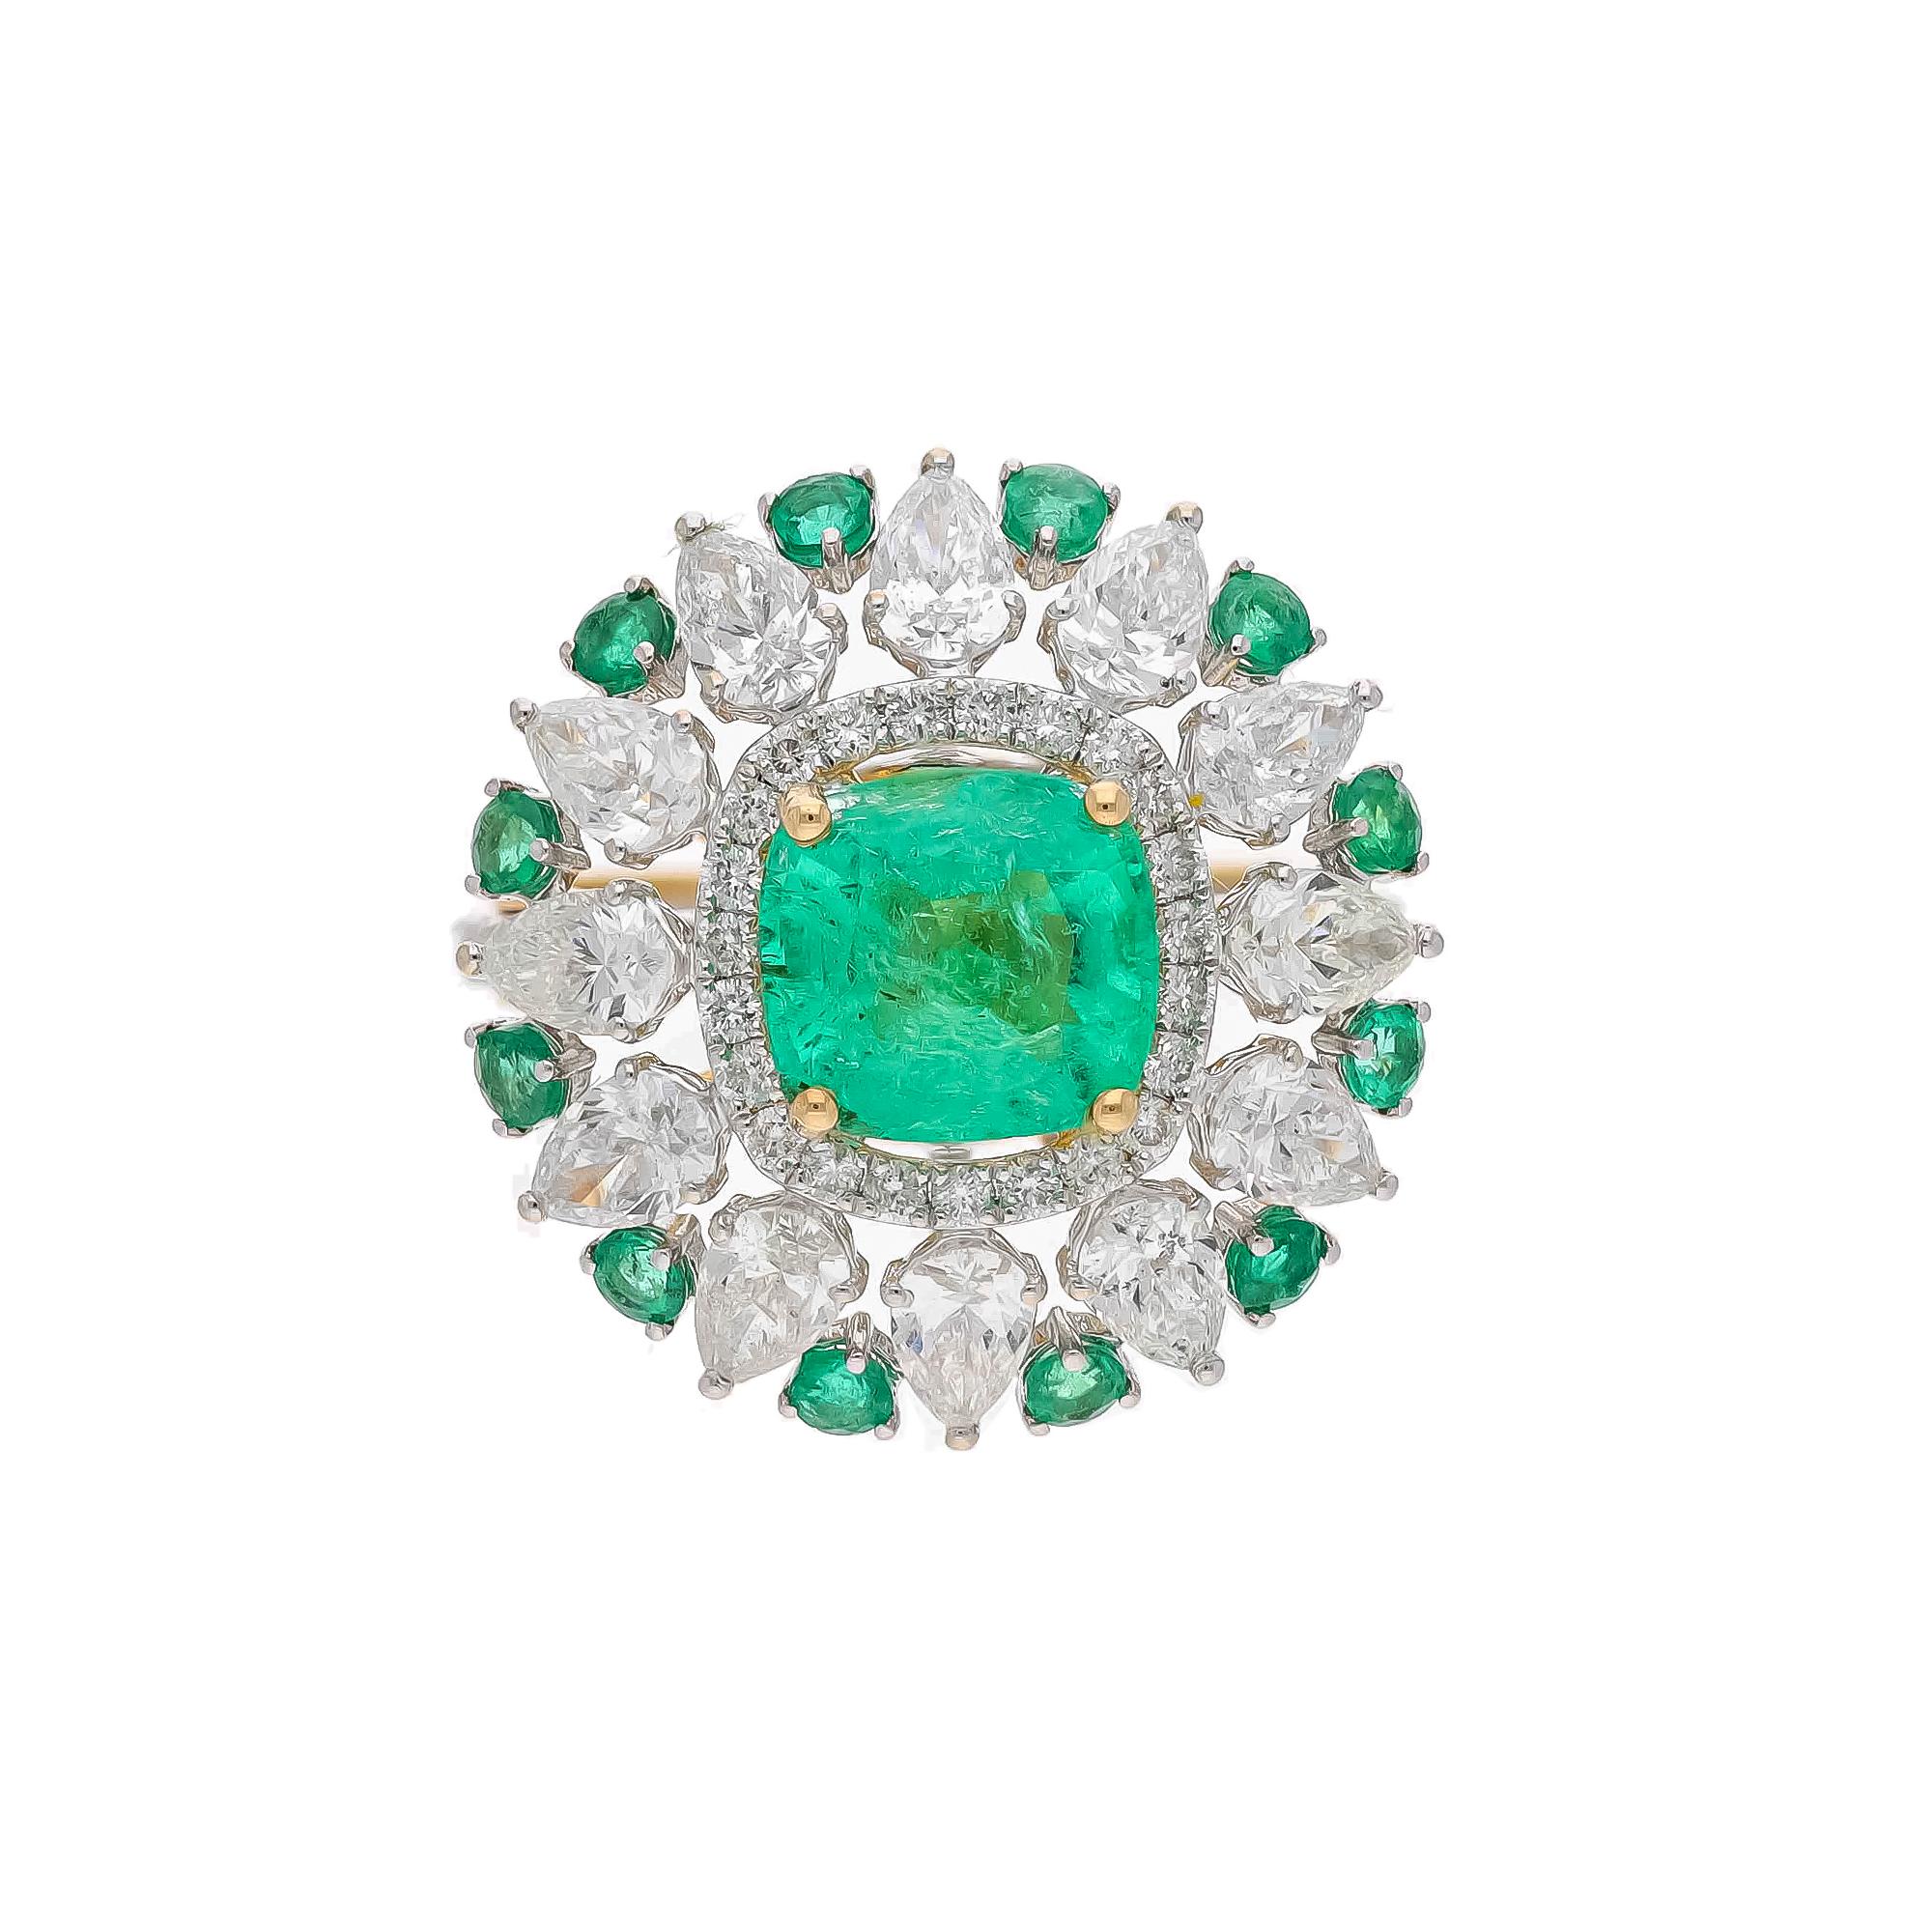 This is a natural Columbian Emerald ring with diamonds and 18k gold. The emeralds are very high quality and very good quality diamonds the clarity is vsi and G colour


Emeralds : 2.49 carats
Emerald : 0.60 carats
diamonds : 2.78 carats
gold : 6.546